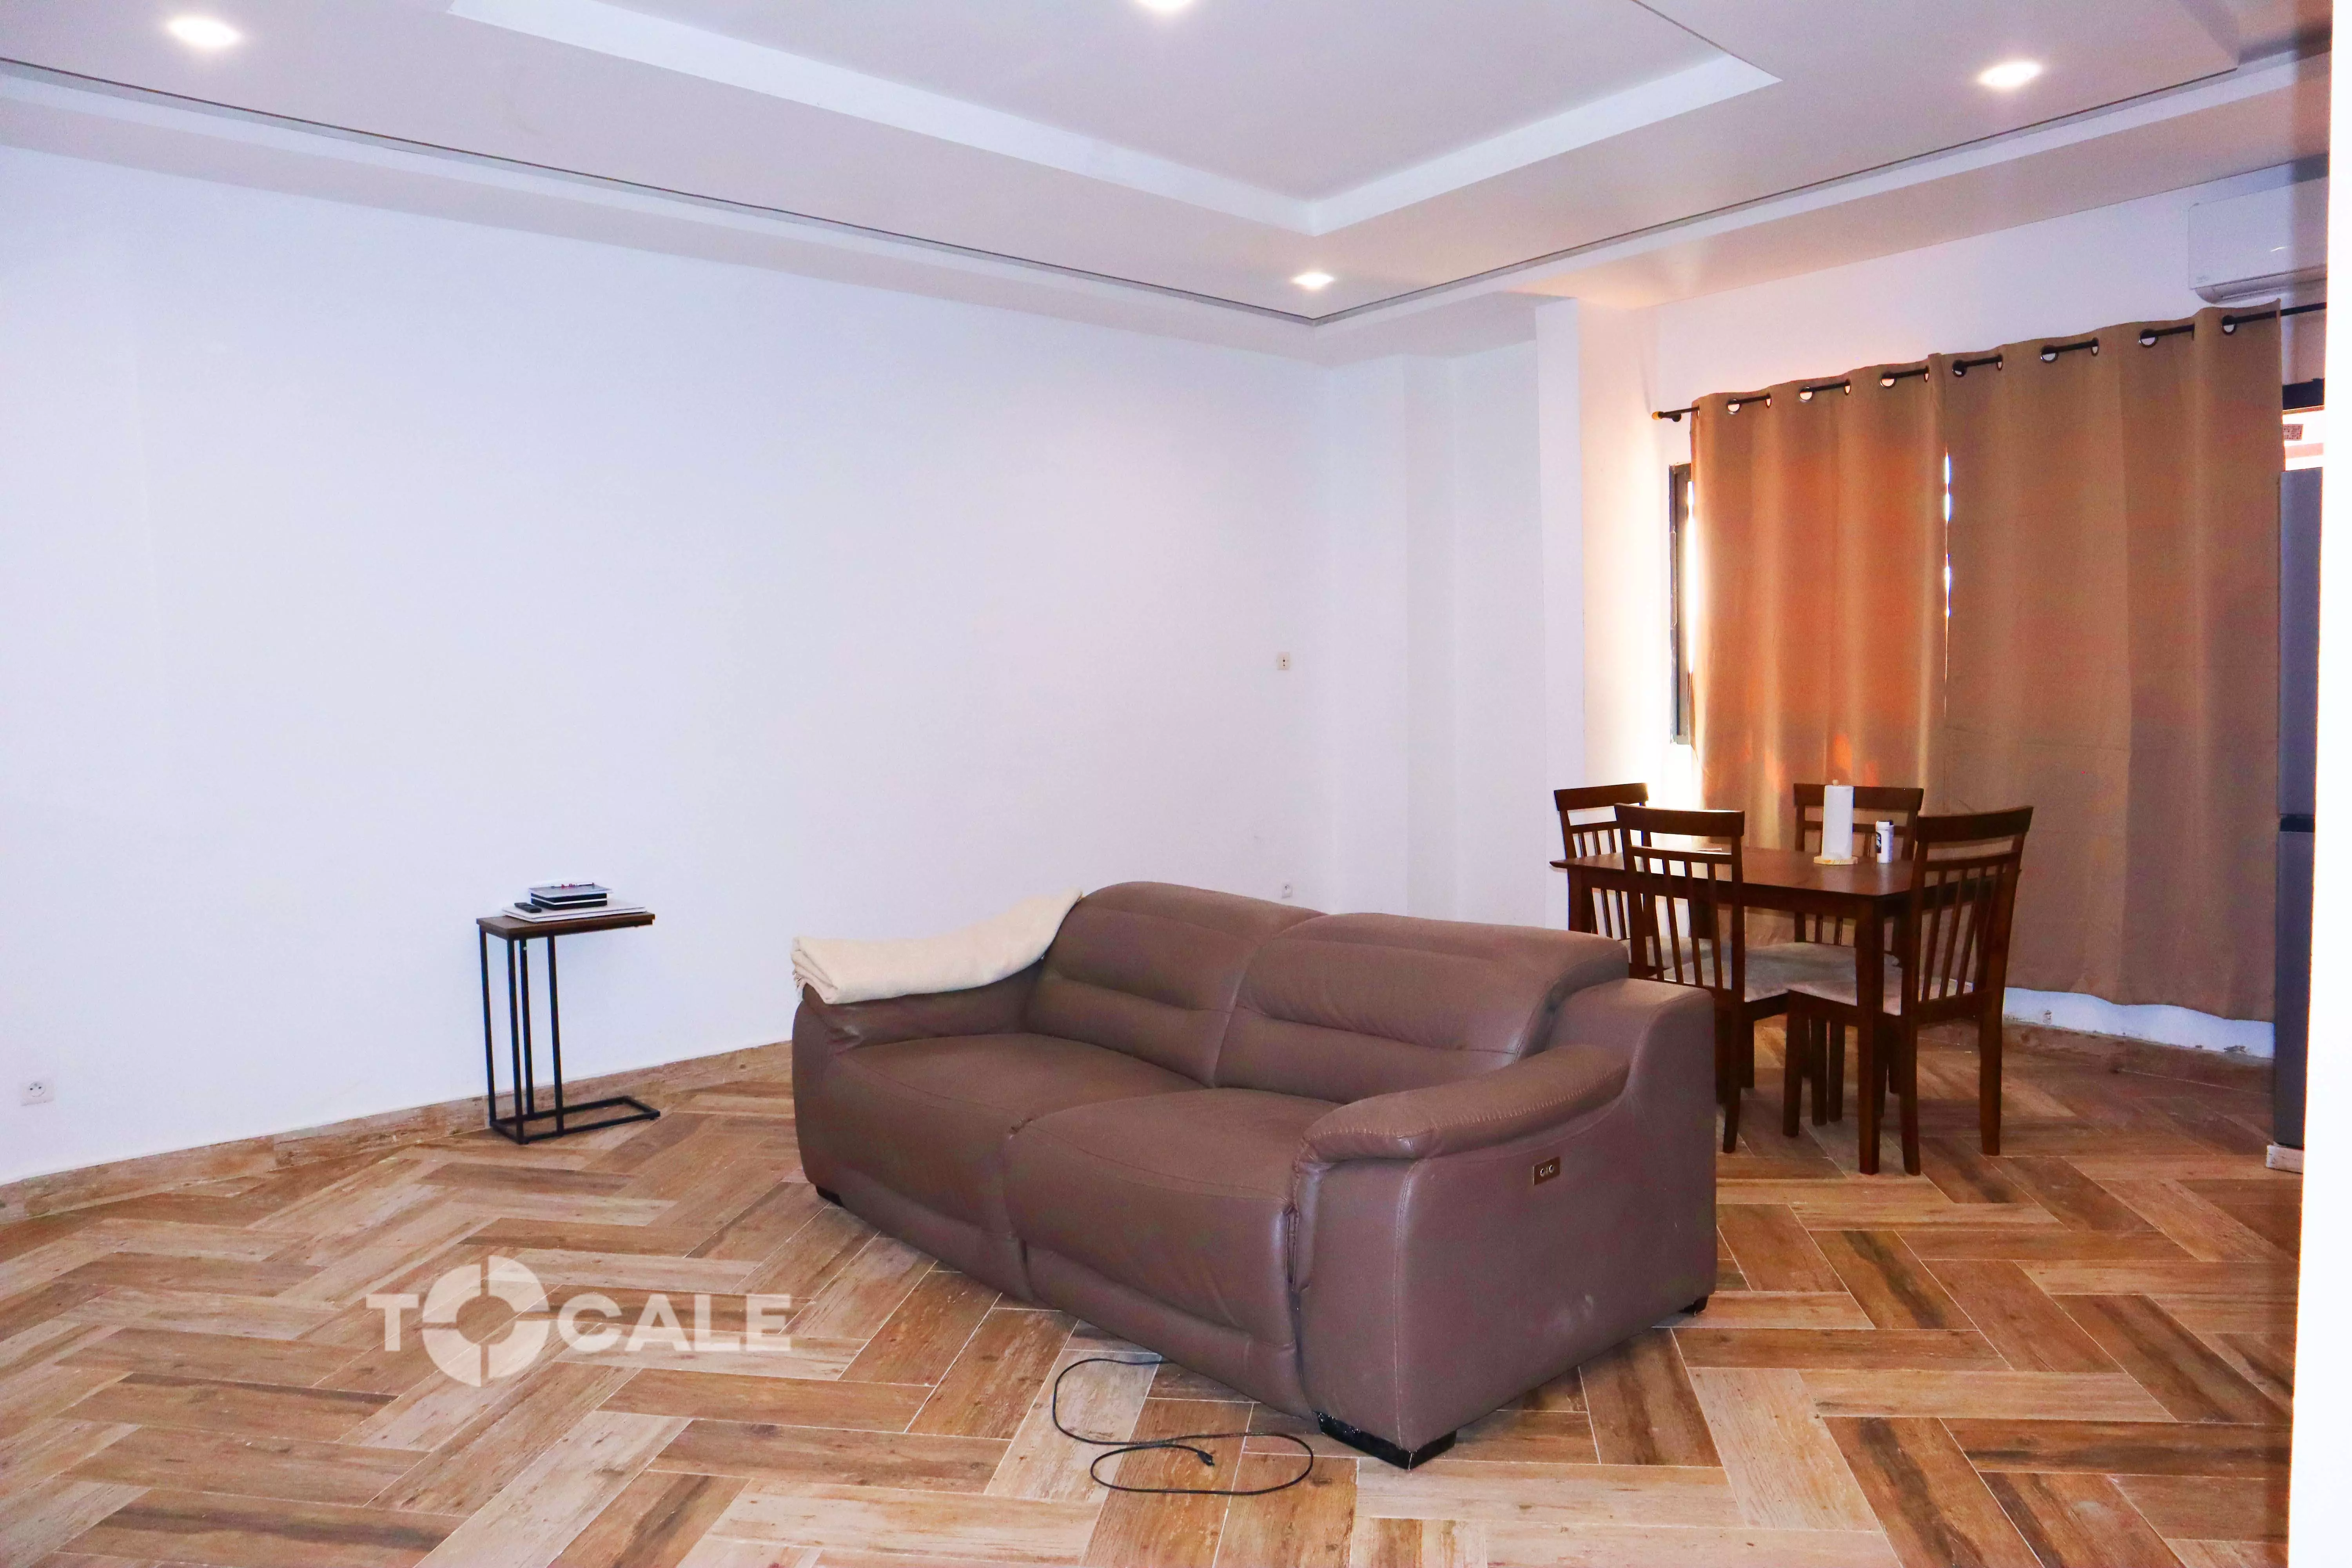 Appartement F3 au Almadie | Tocale immobilier